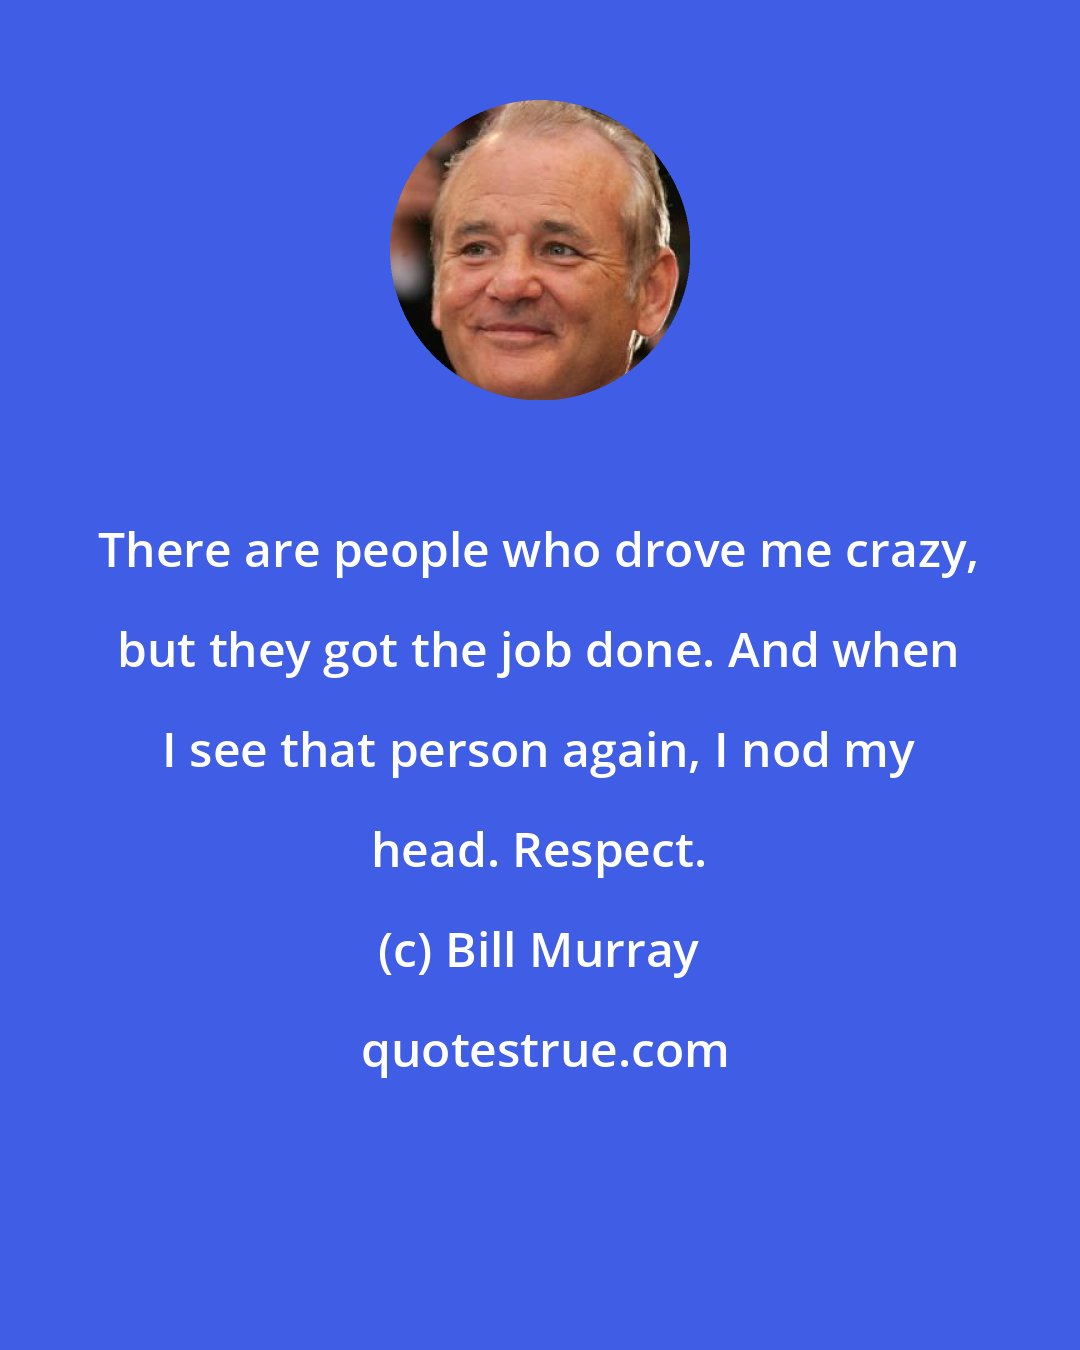 Bill Murray: There are people who drove me crazy, but they got the job done. And when I see that person again, I nod my head. Respect.